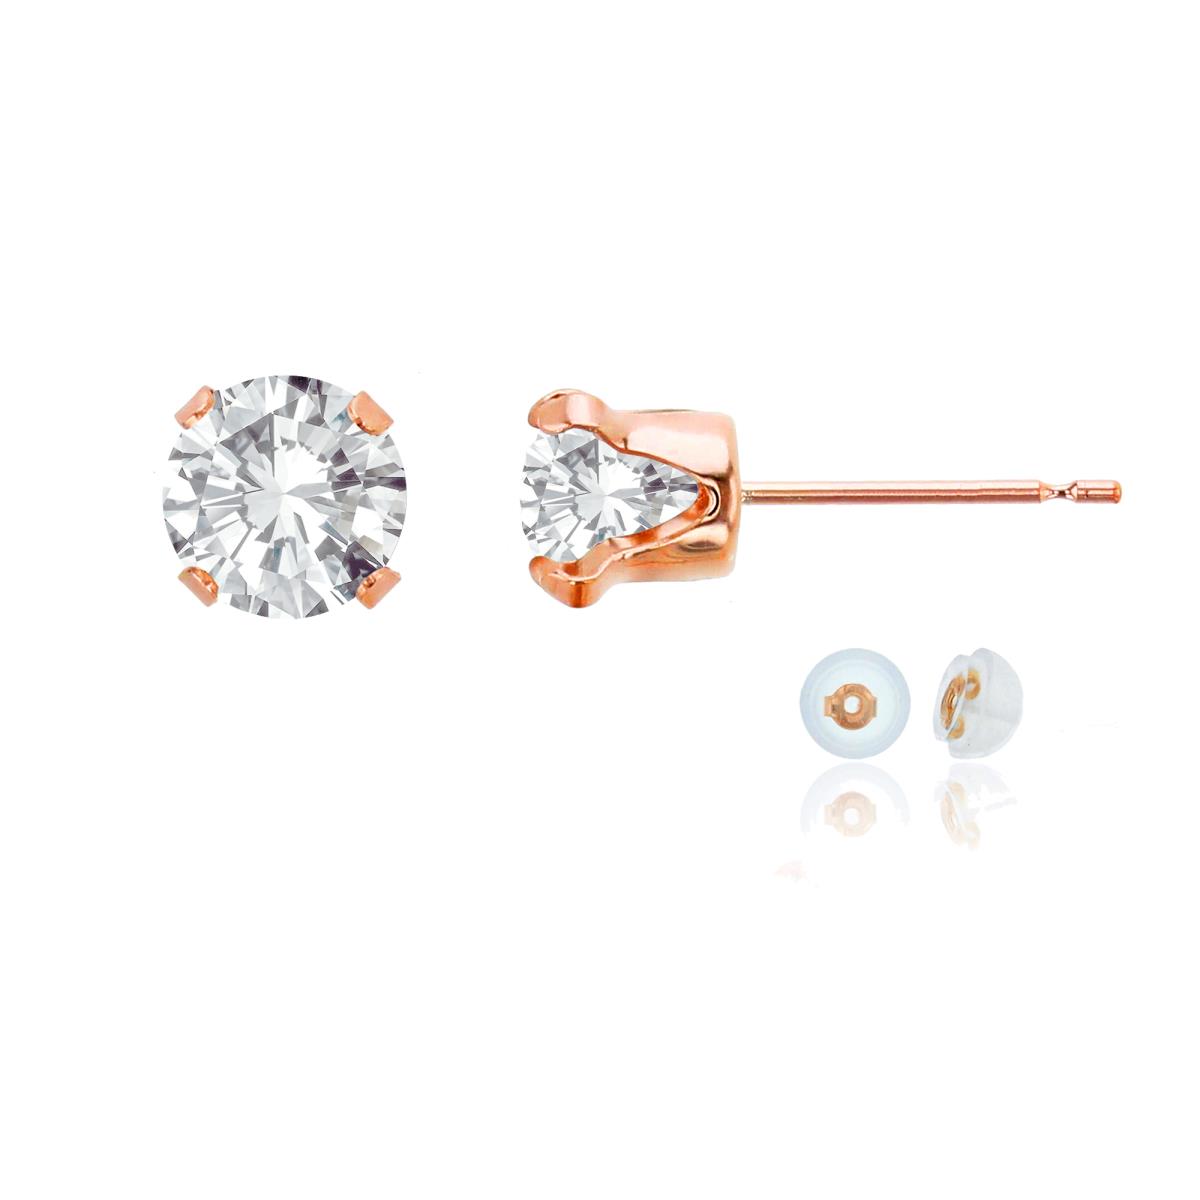 14K Rose Gold 6mm Round White Topaz Stud Earring with Silicone Back